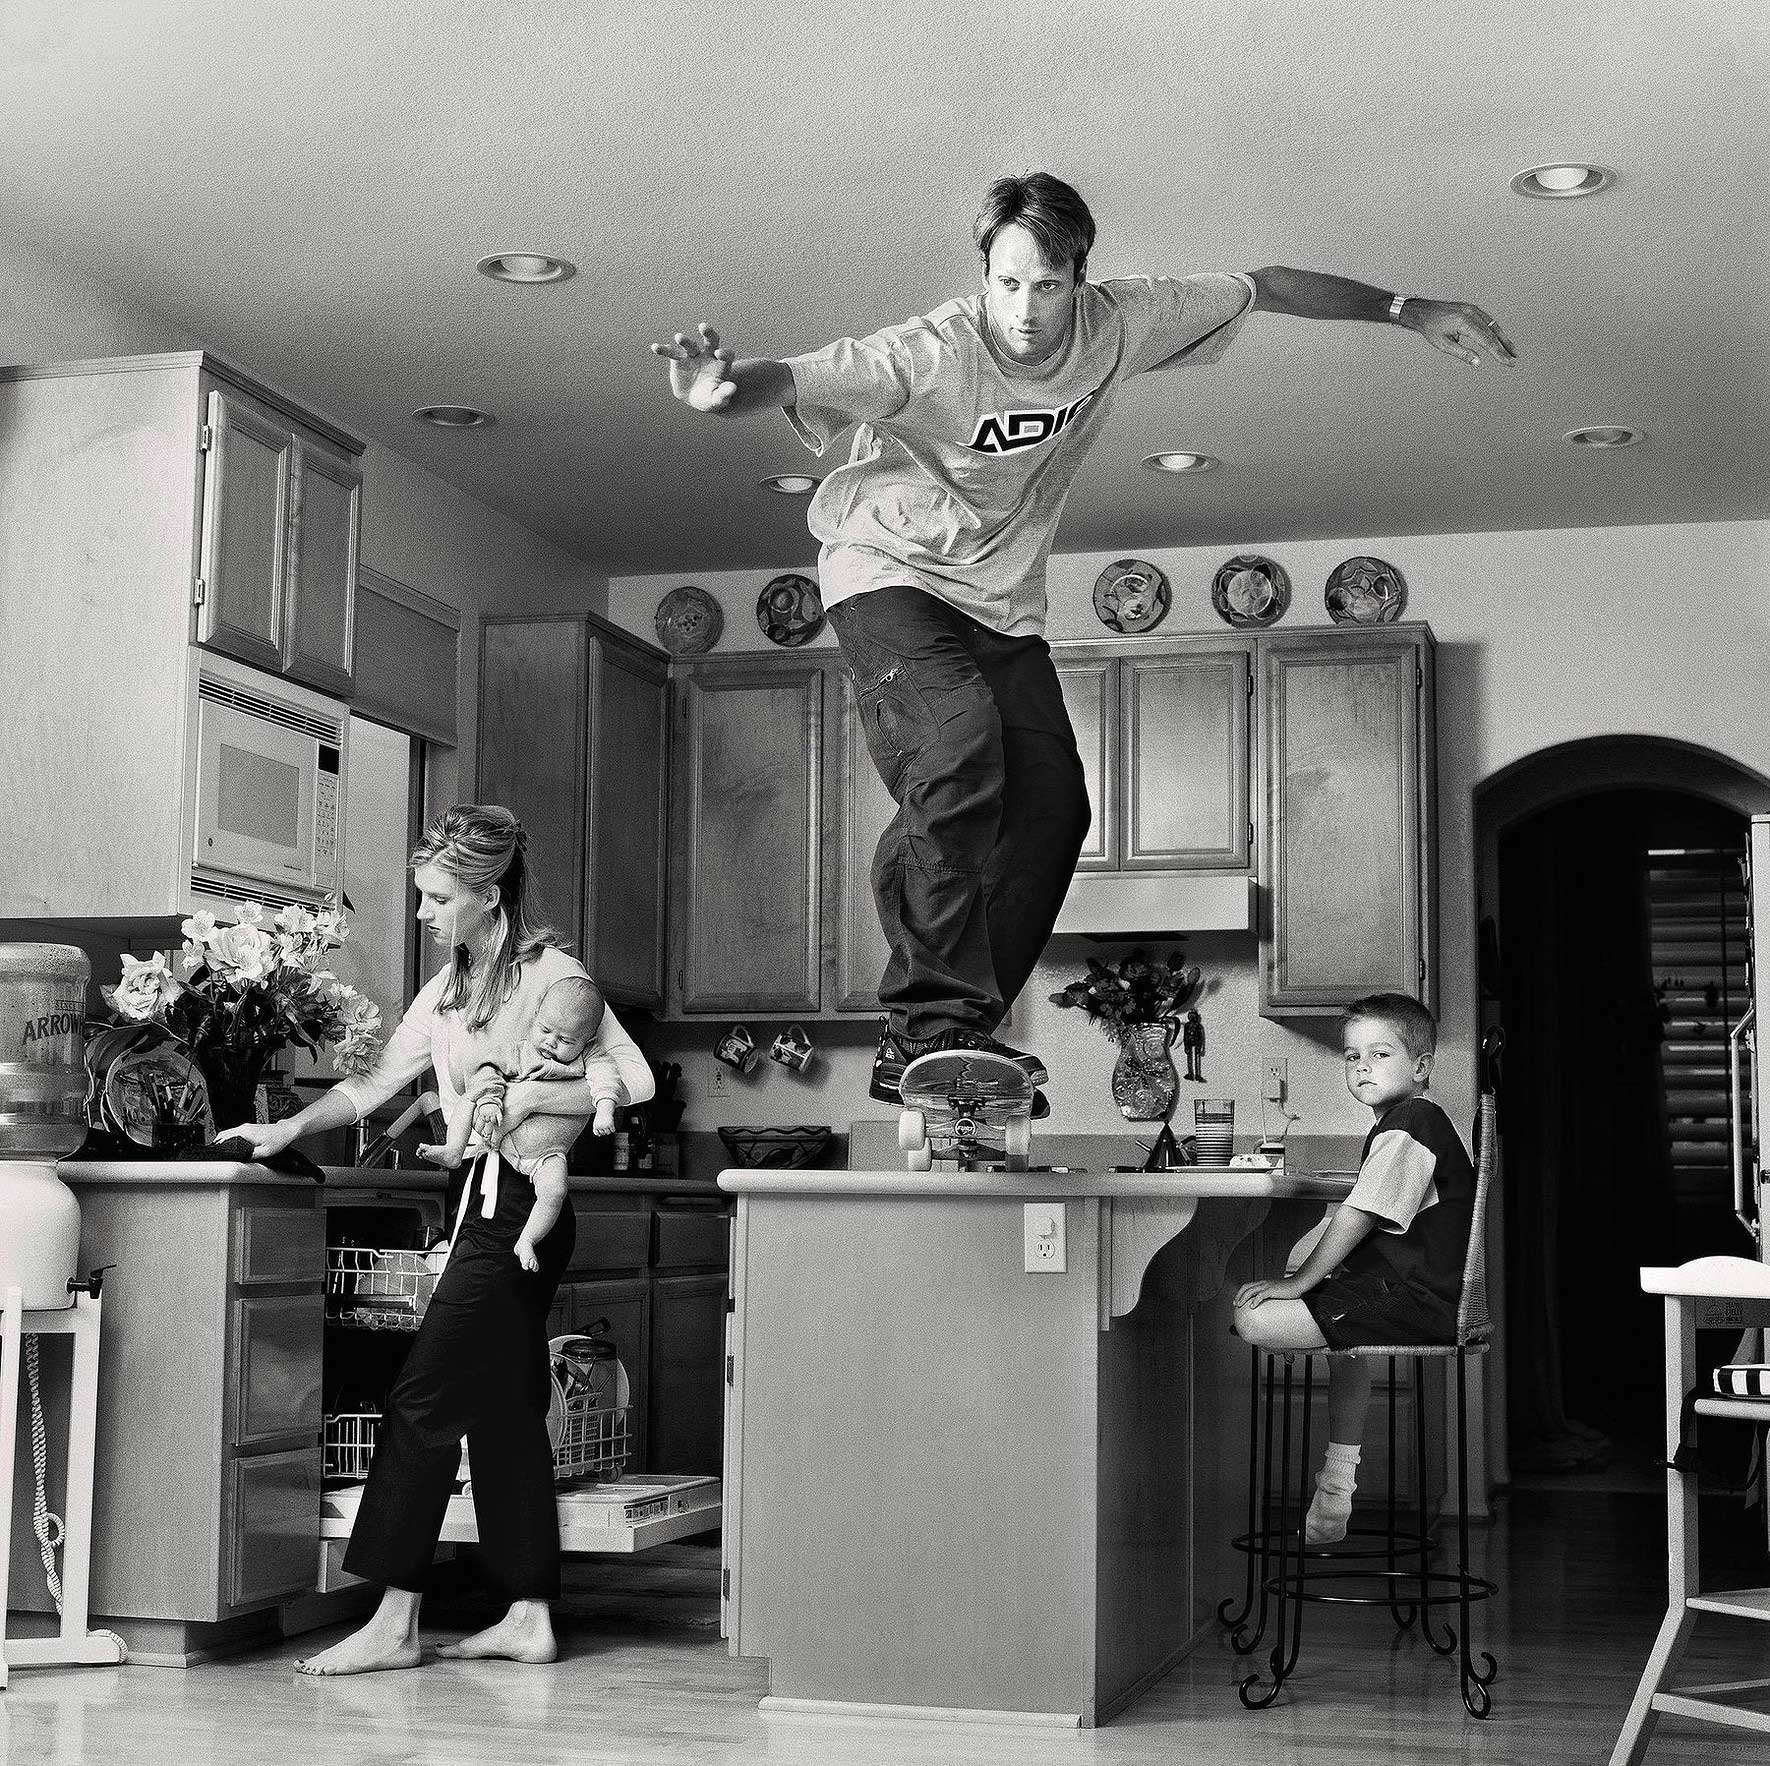 Here, Martin Schoeller talks TIME through a selection of high profile shoots from his new book "Portraits".Tony Hawk. "It was a crazy day. I had another shoot the night before and I had to drive down at 3 or 4 in the morning. We showed up at his house before sunrise. I had thought skaters are always trying to break rules — jumping off cars. Skateboarding has that bad boy connotation. So I thought he’s more of a family man he’s a bit older, but still maybe to take a picture that still shows skateboarding culture in a family setting. And when I came to the house and saw this great kitchen counter, I had this spontaneous idea of him jumping off it.He said 'no!' It was 6.30 in the morning and he didn’t feel like jumping off the counter. But I started talking to his wife. And I said 'you would be in the picture too.' And she basically talked him into it. This one picture was the reason I was offered a contract with the New Yorker."